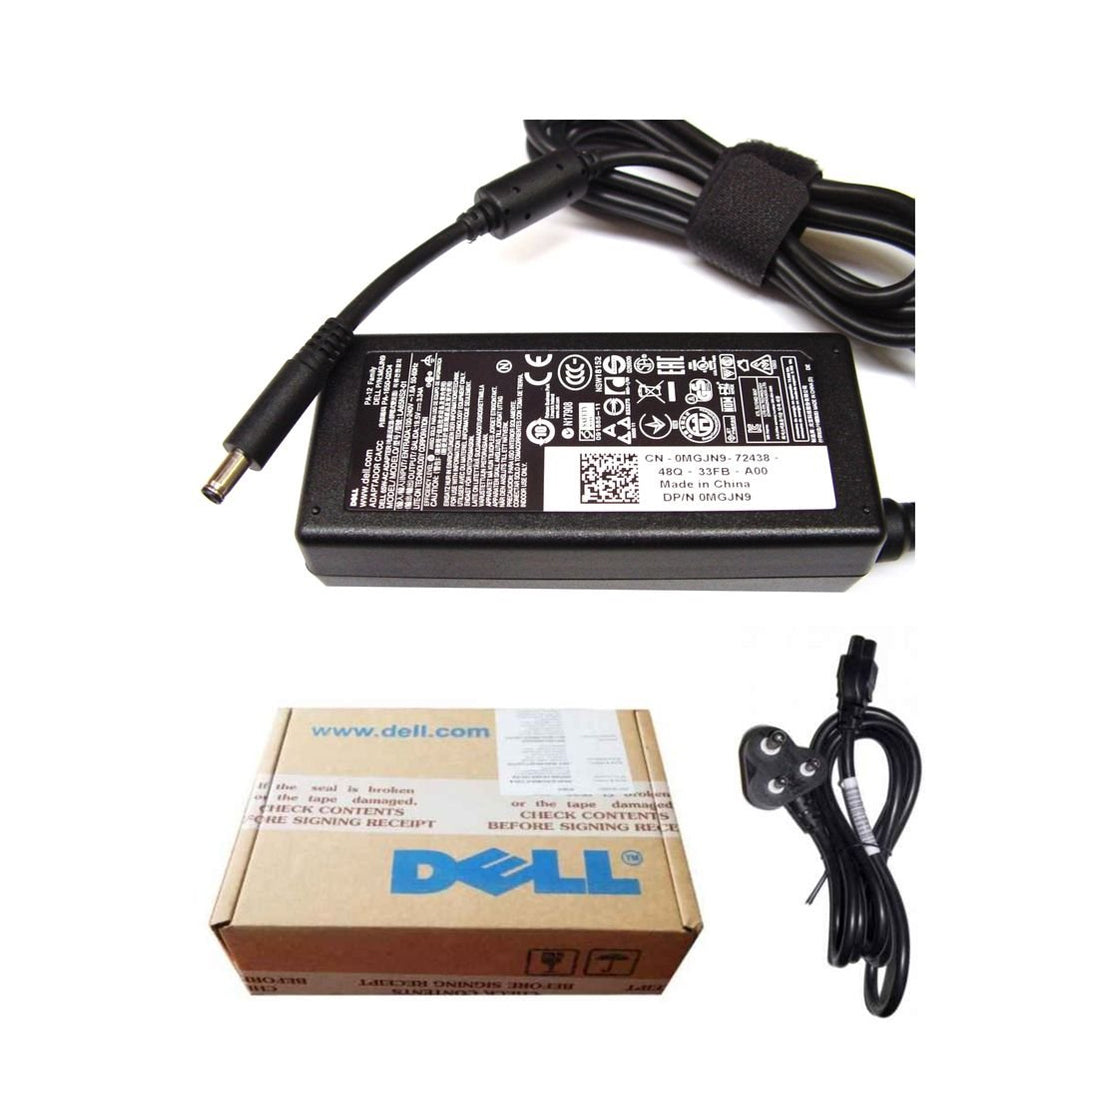 Dell Original 65W 19.5V 4.5mm Pin Laptop Charger Adapter for Vostro 15 5568 With Power Cord